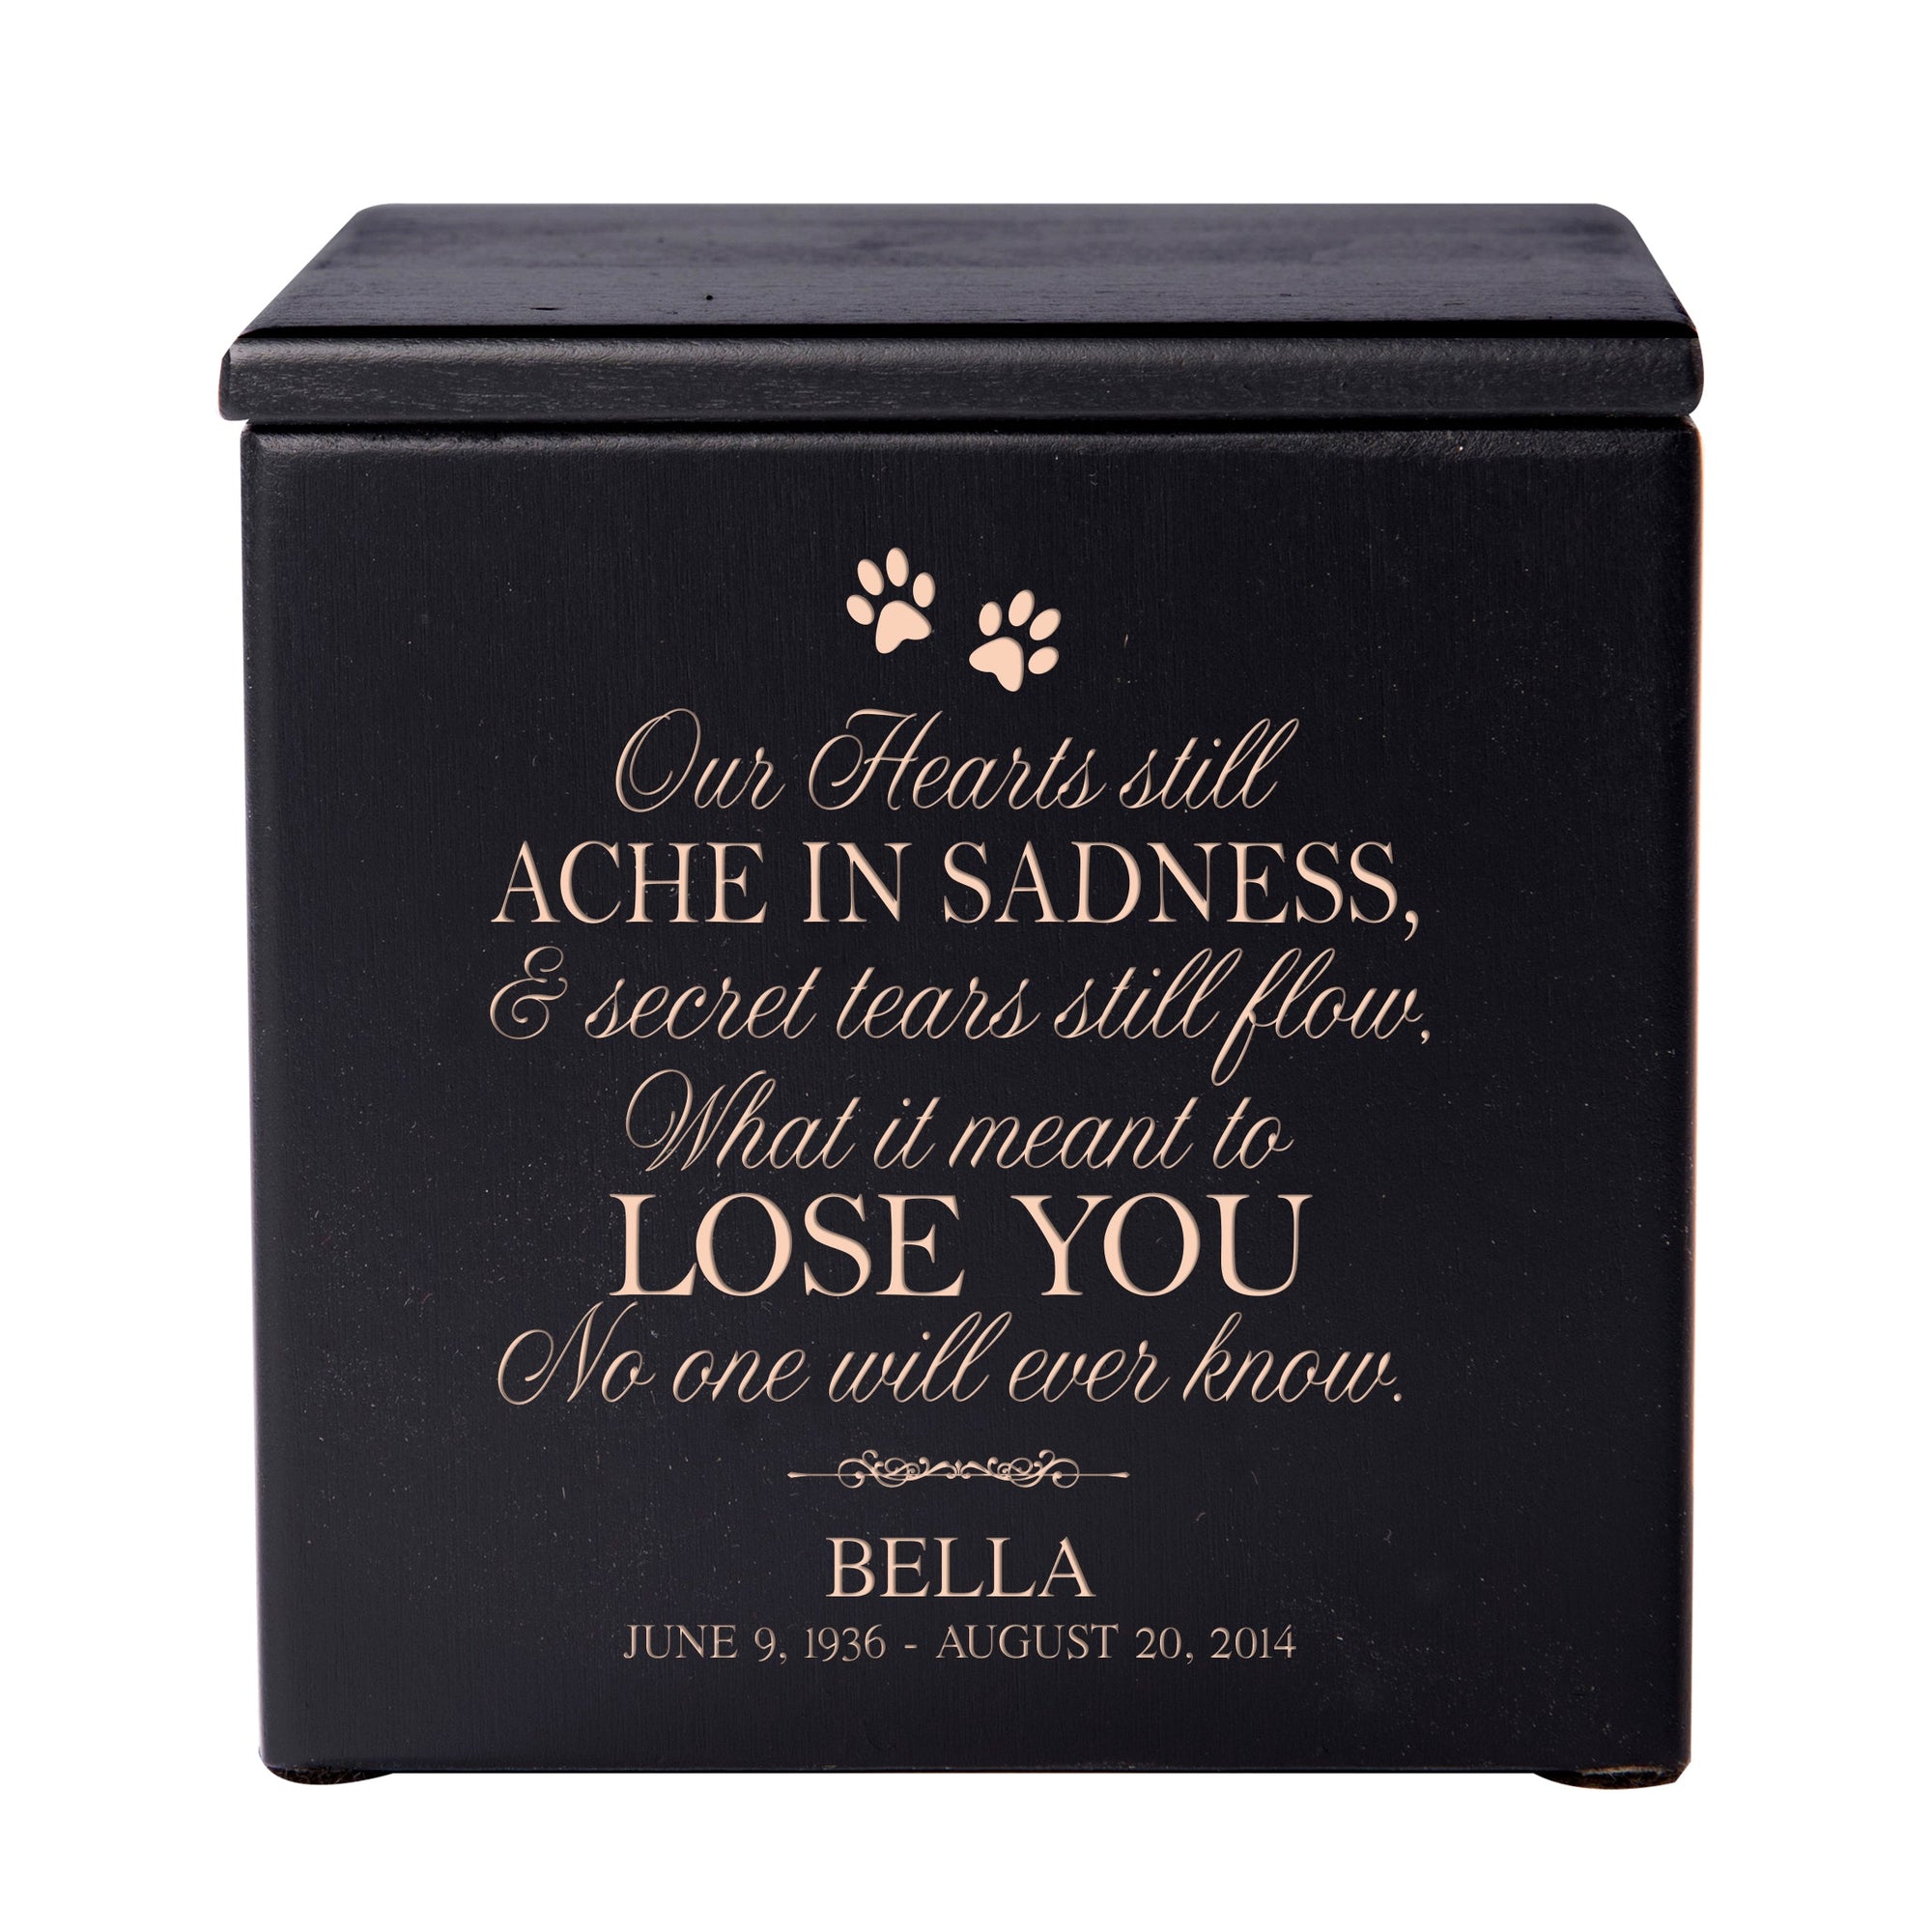 Pet Memorial Keepsake Cremation Urn Box for Dog or Cat - Our Hearts Still Ache In Sadness